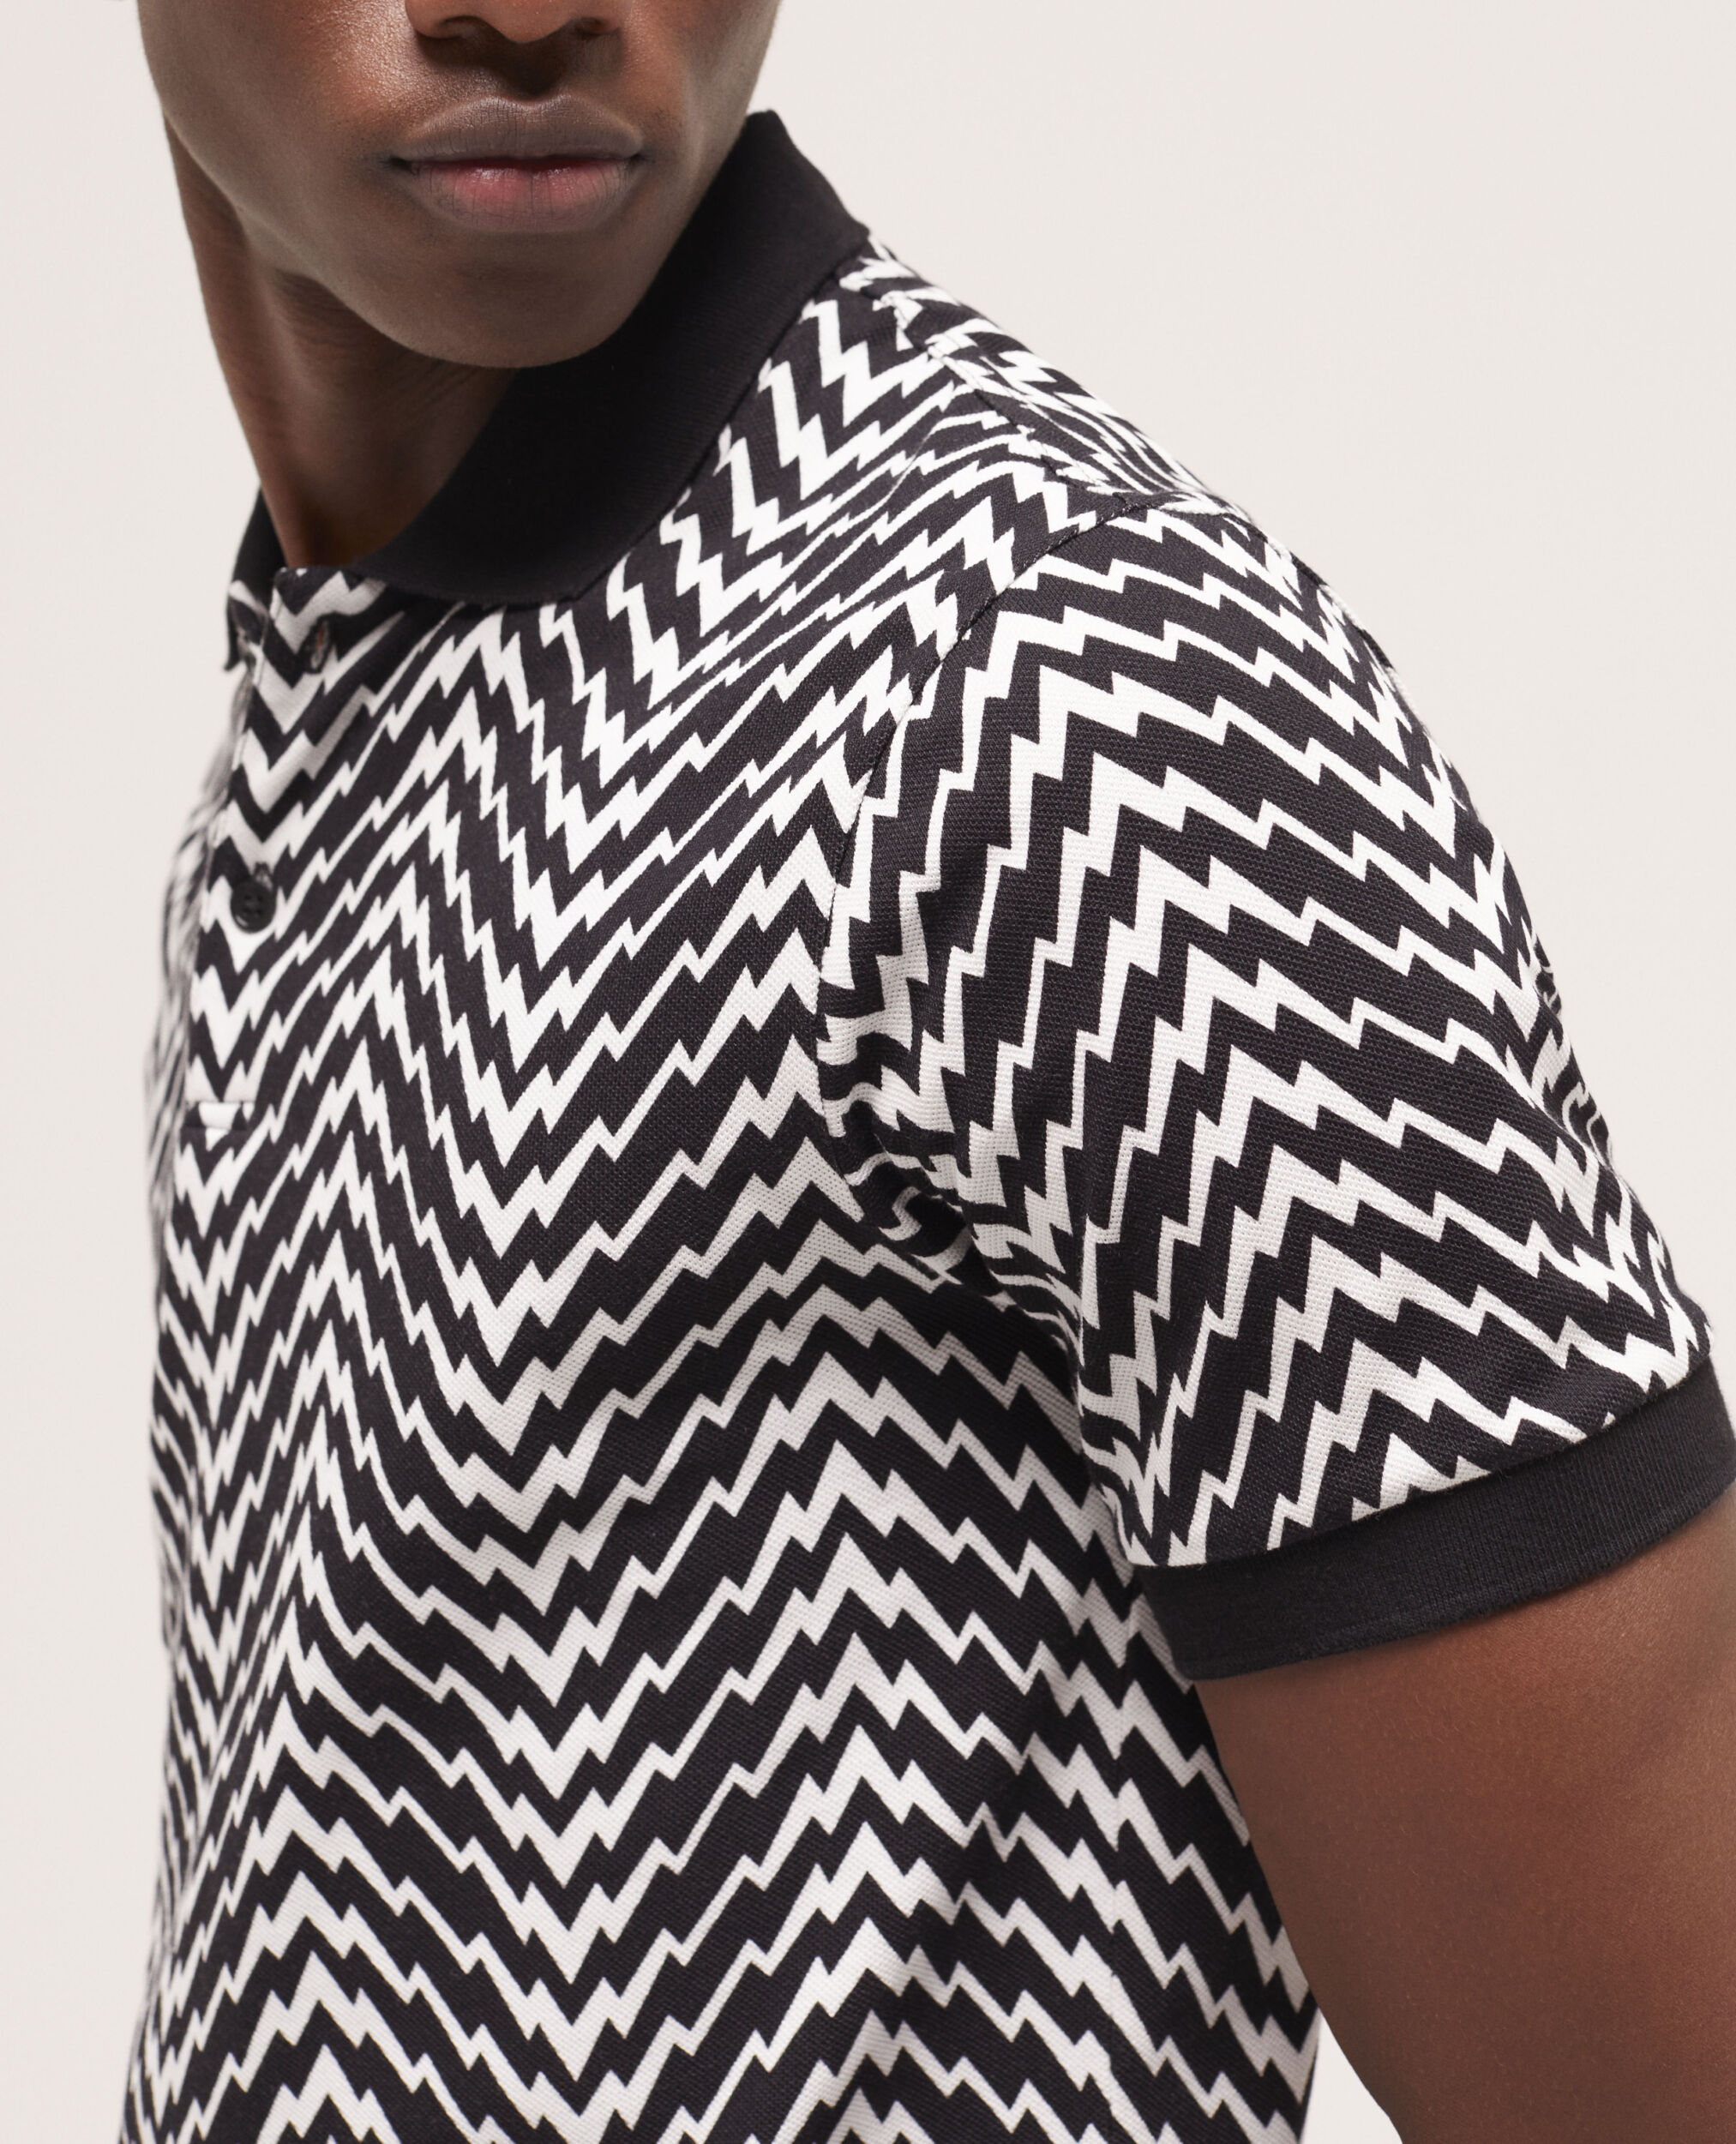 Printed polo shirt, BLACK / WHITE, hi-res image number null